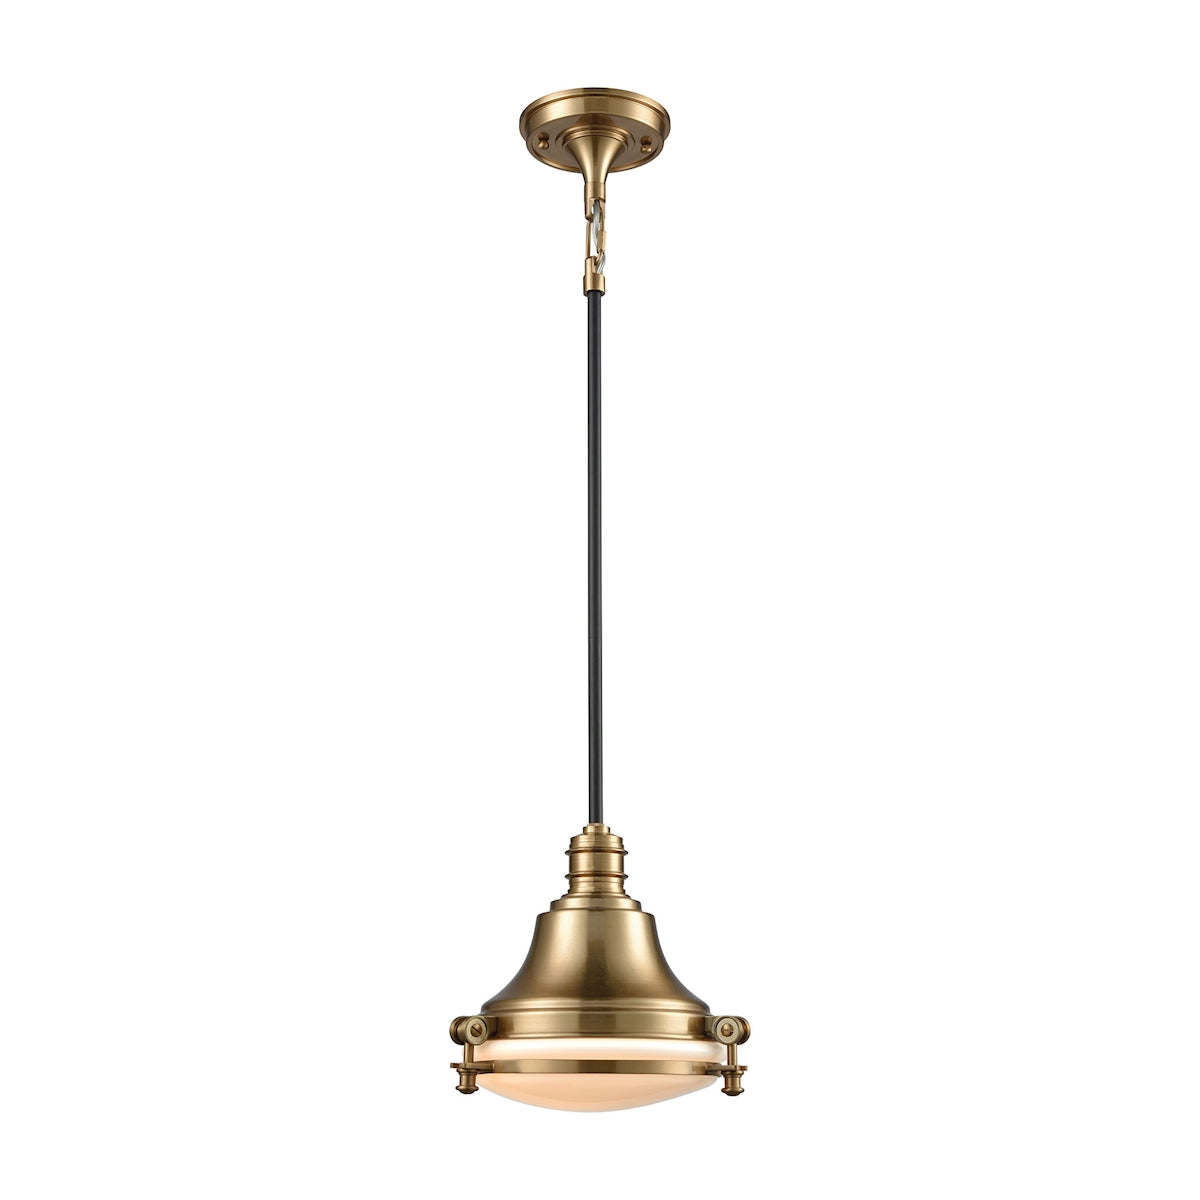 ELK Lighting 16072/1 Riley 1-Light Mini Pendant in Oil Rubbed Bronze and Satin Brass with Opal White Glass